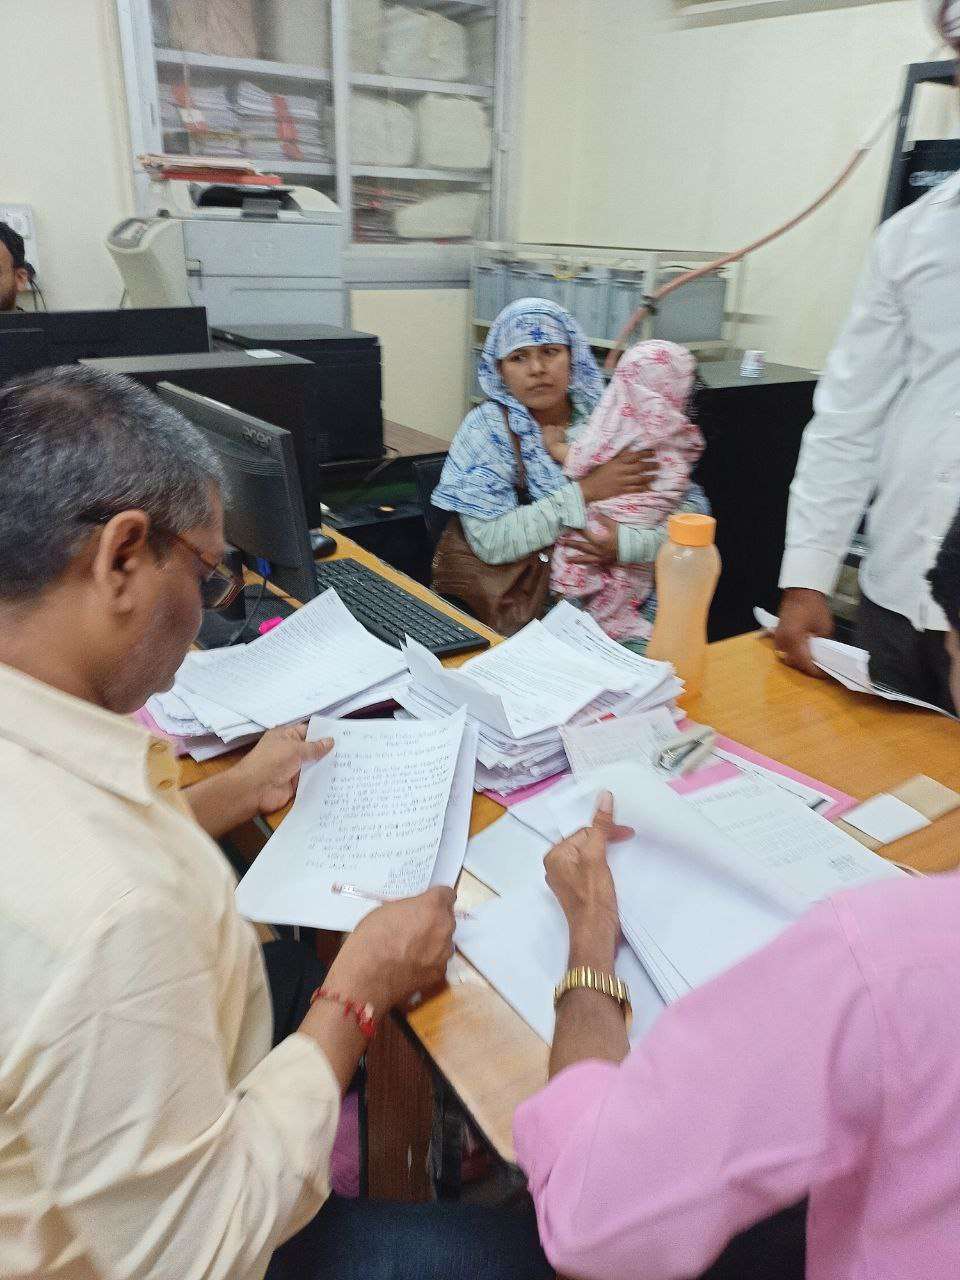 Teachers arrived with three-month-old children in the election office